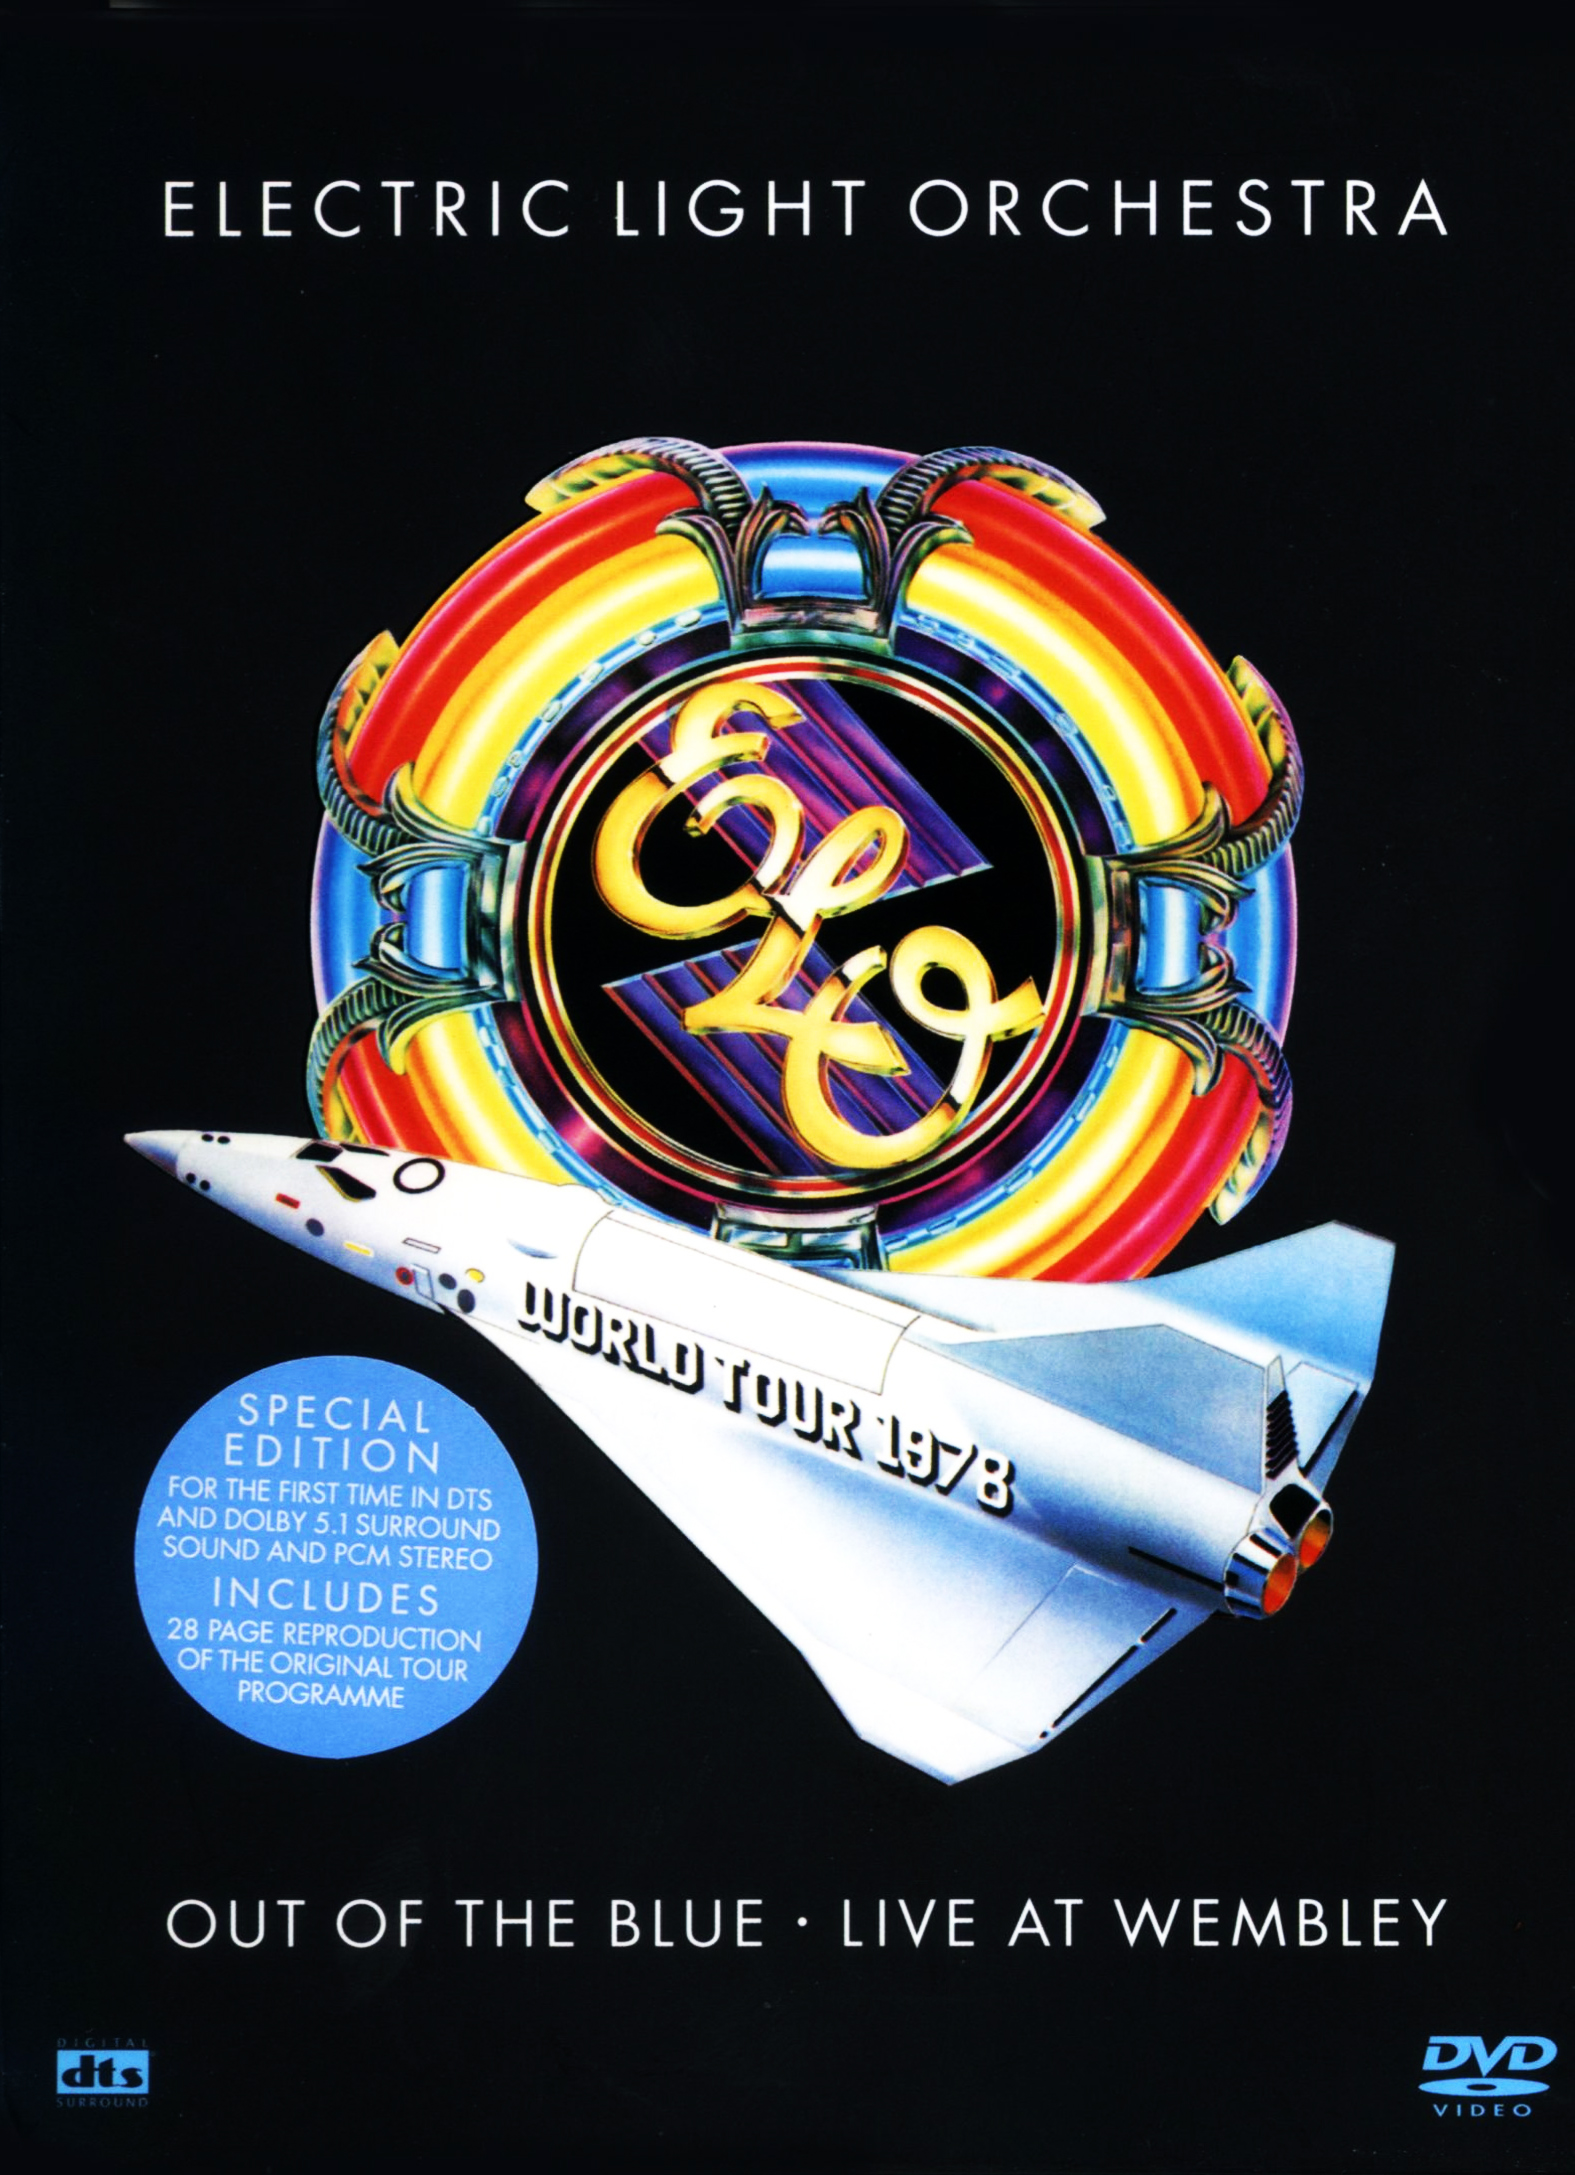 Electric Light Orchestra - Out of the Blue - Live at Wembley  